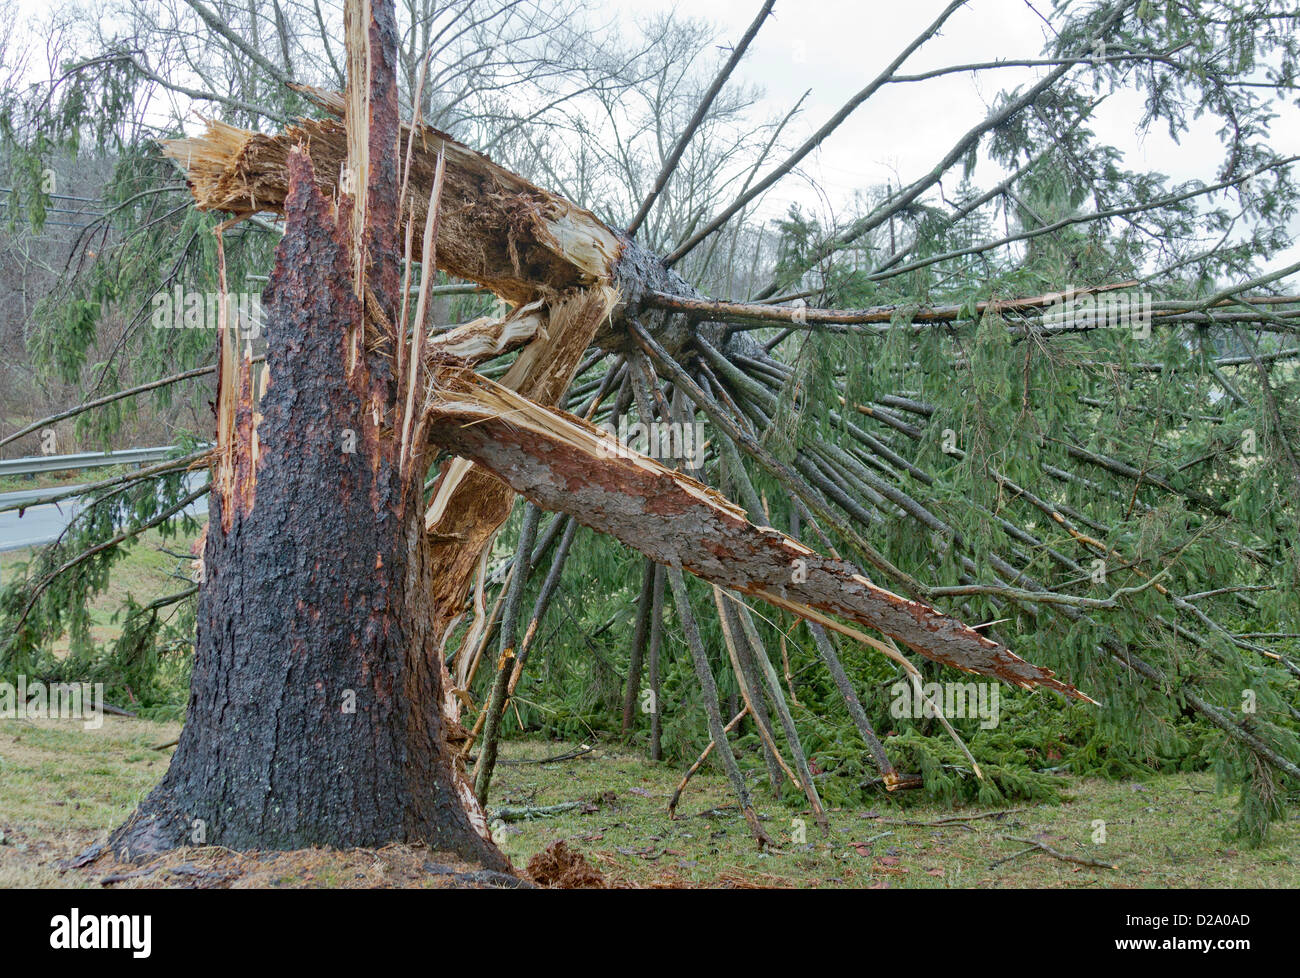 A pine tree snapped in half at the trunk by storm winds Stock Photo